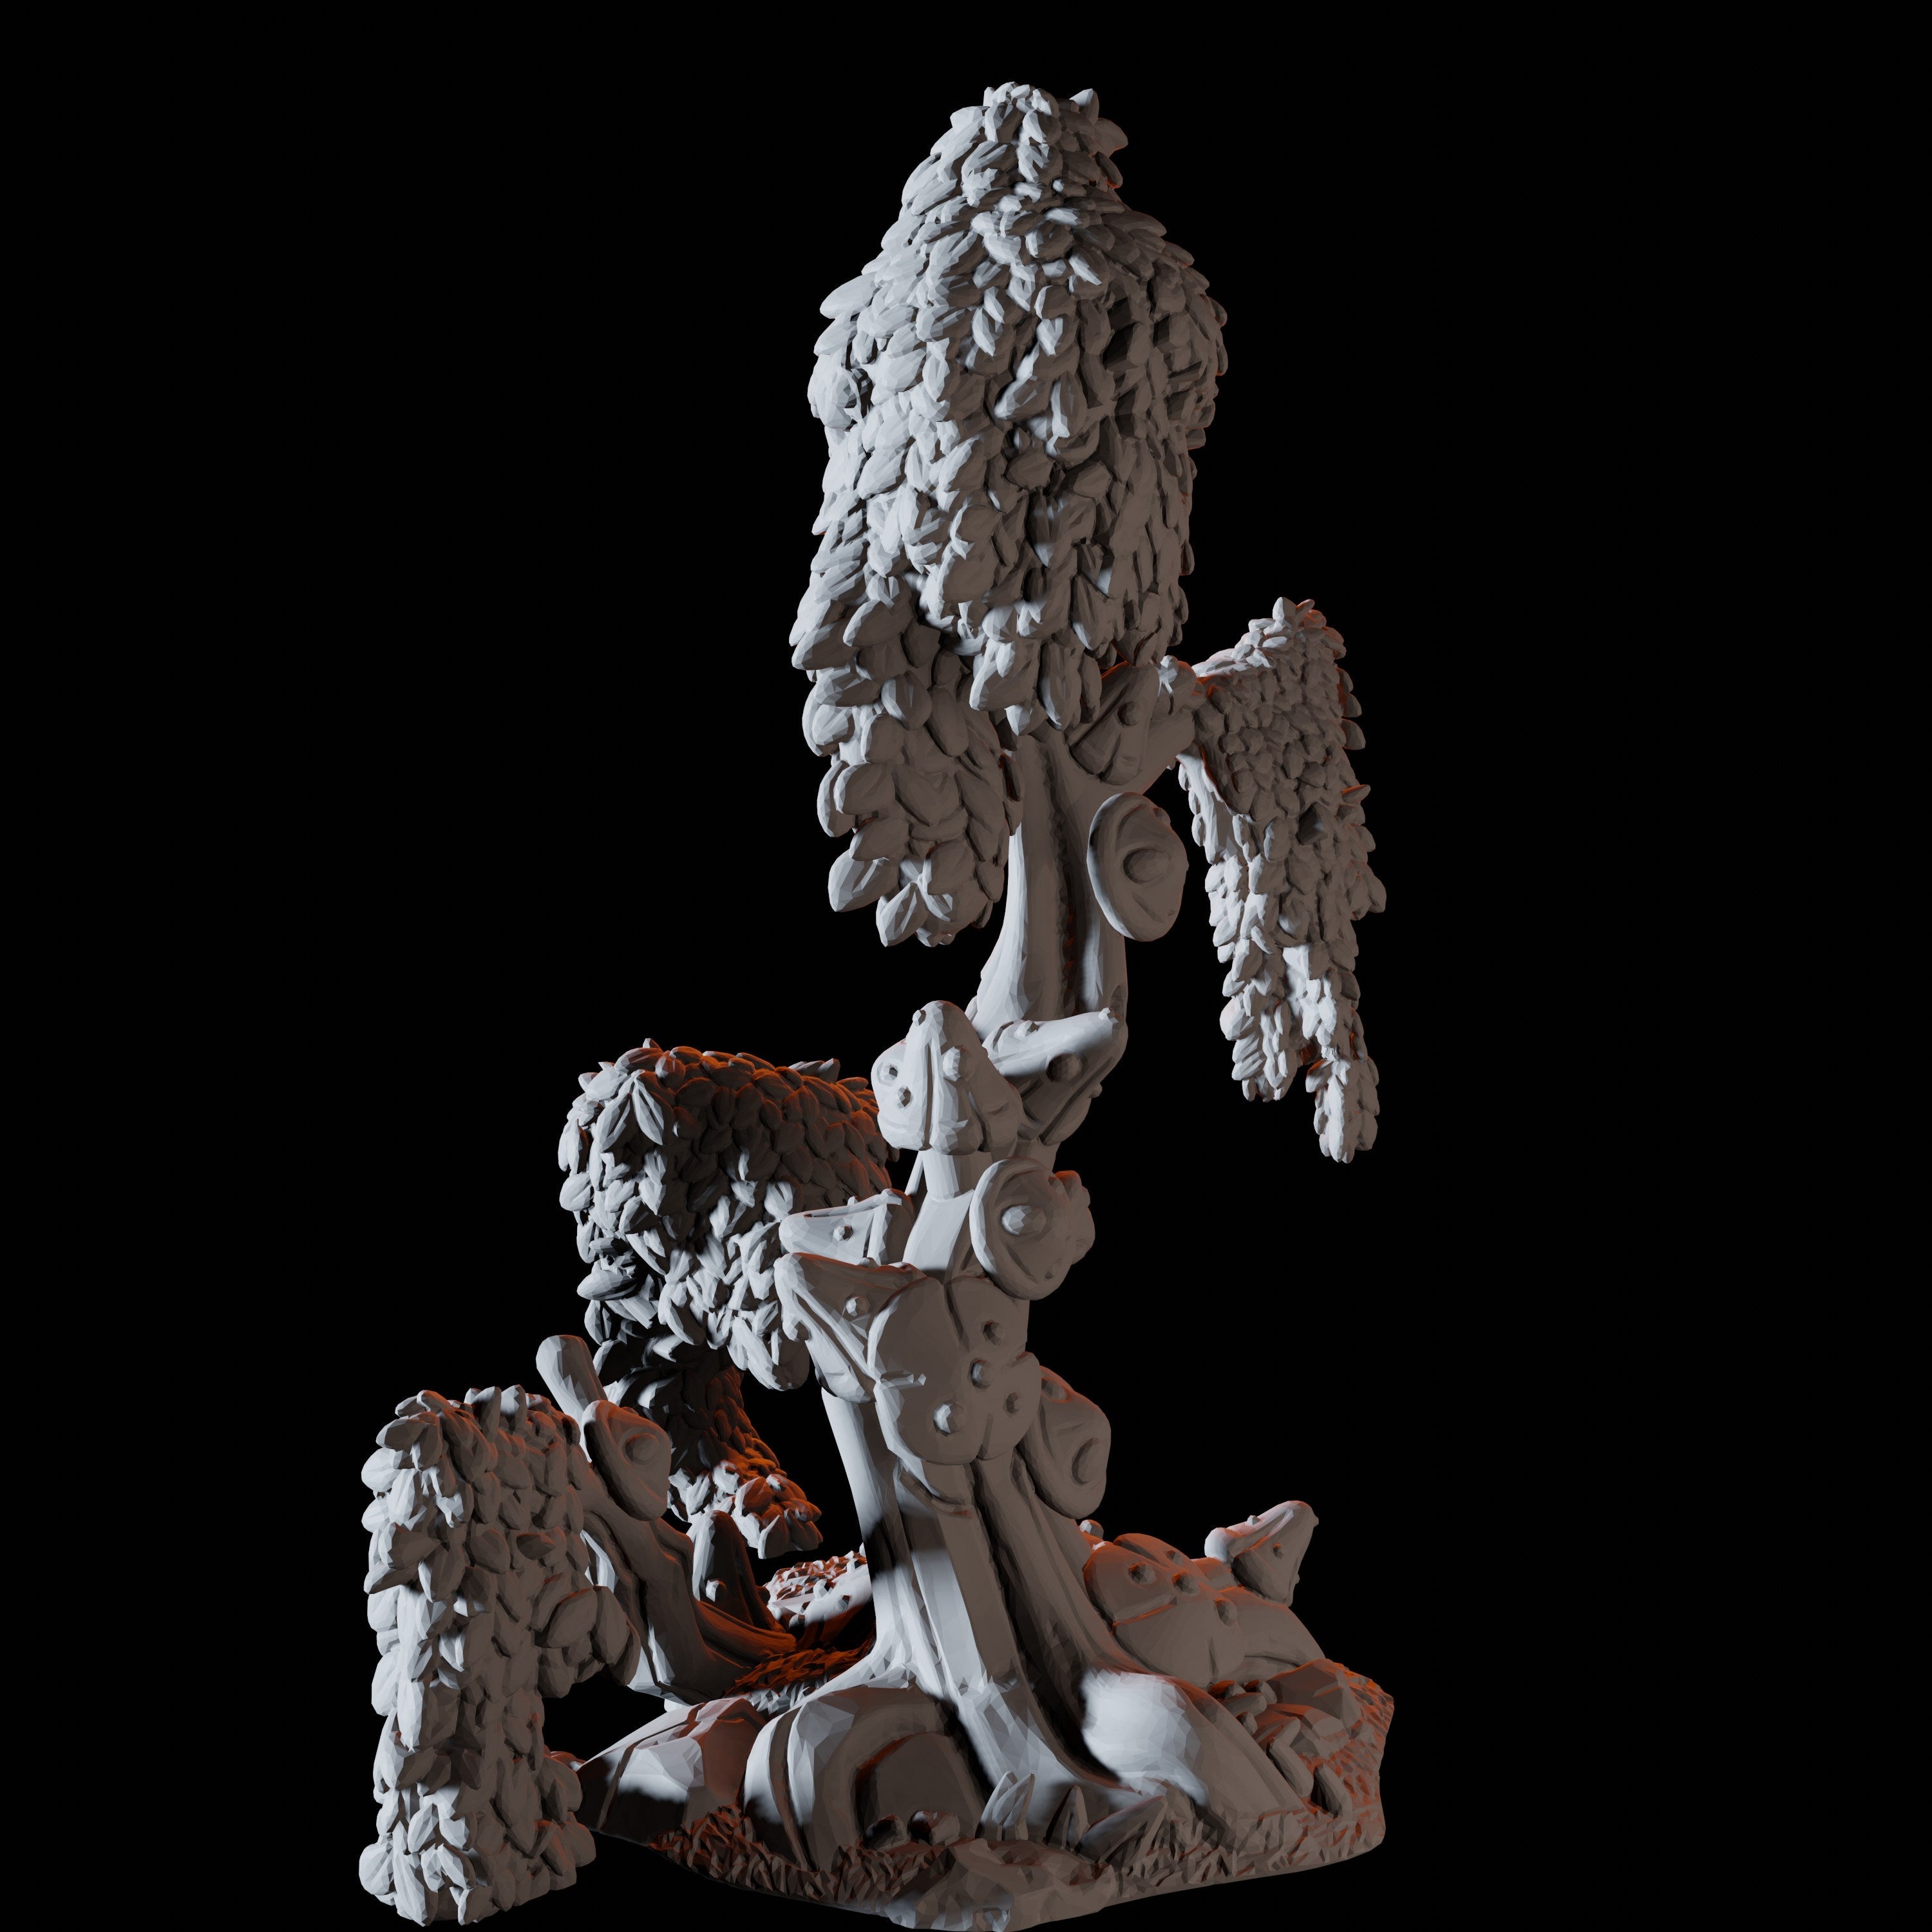 Tiny Tree Mushroom Miniature for Dungeons and Dragons, Pathfinder or other TTRPGs